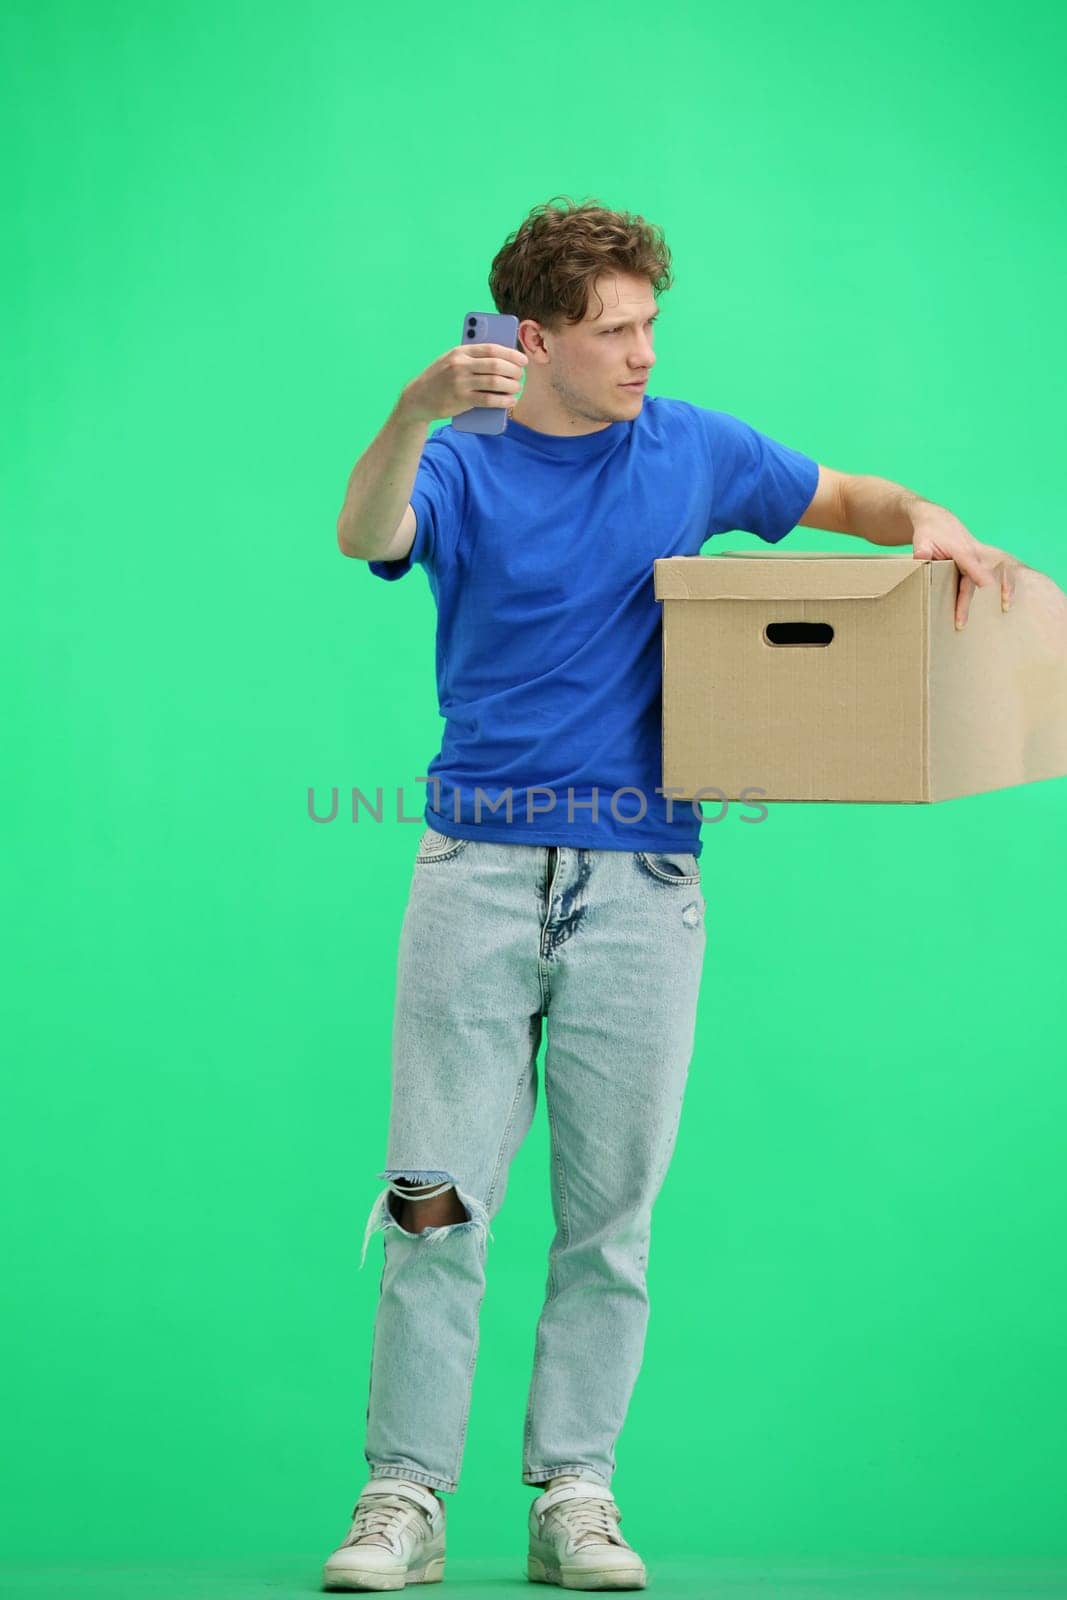 The deliveryman, in full height, on a green background, with a box, talking on the phone by Prosto